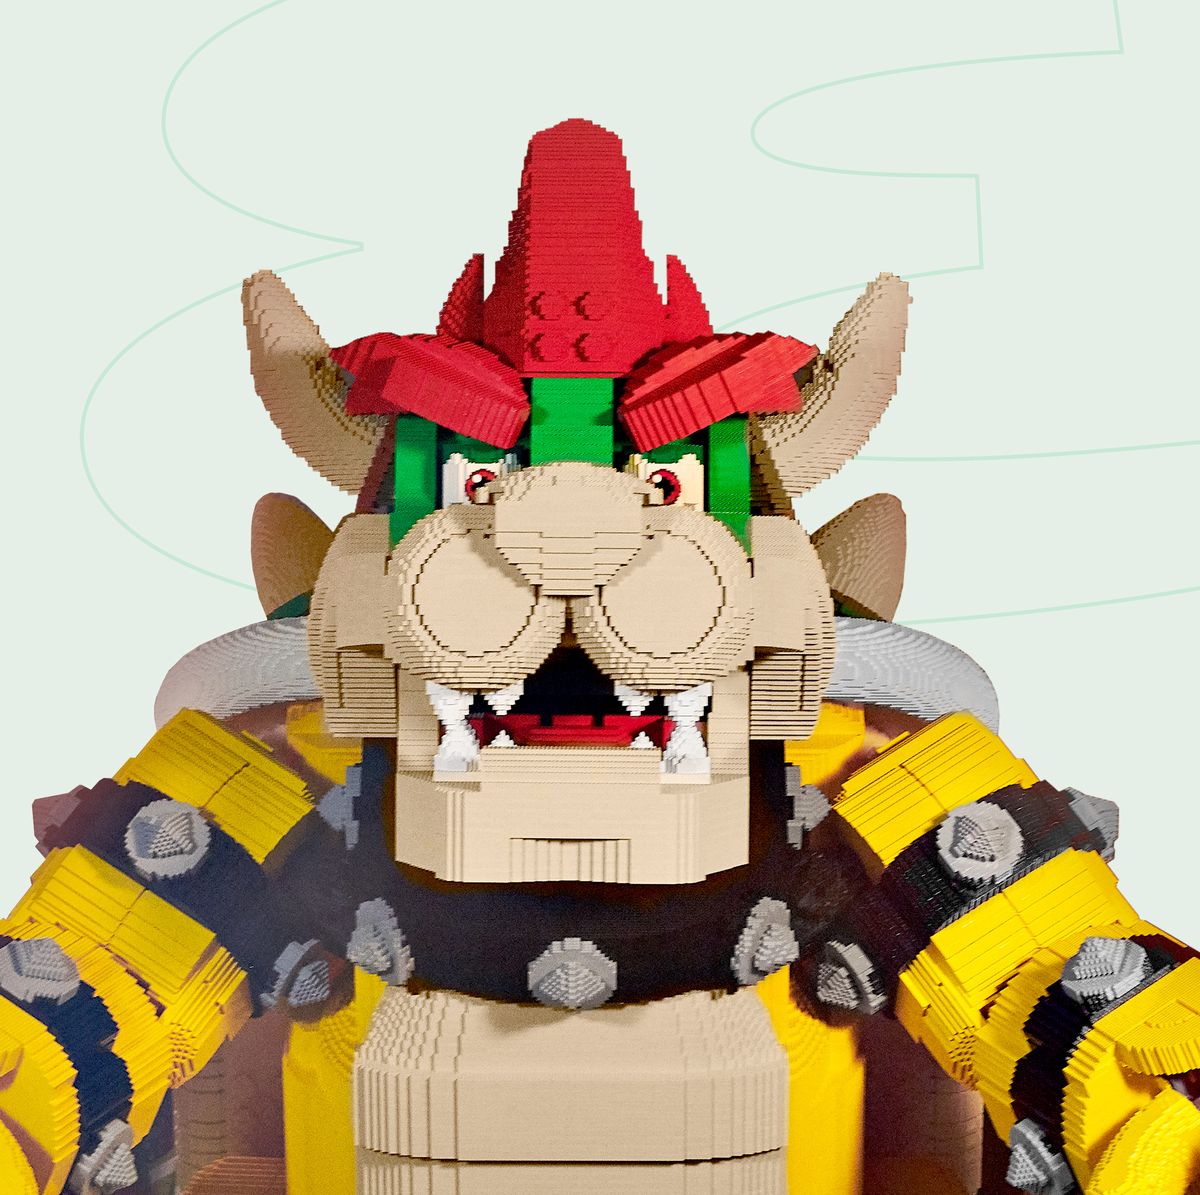 Everything You Need to Know About the Giant LEGO Bowser